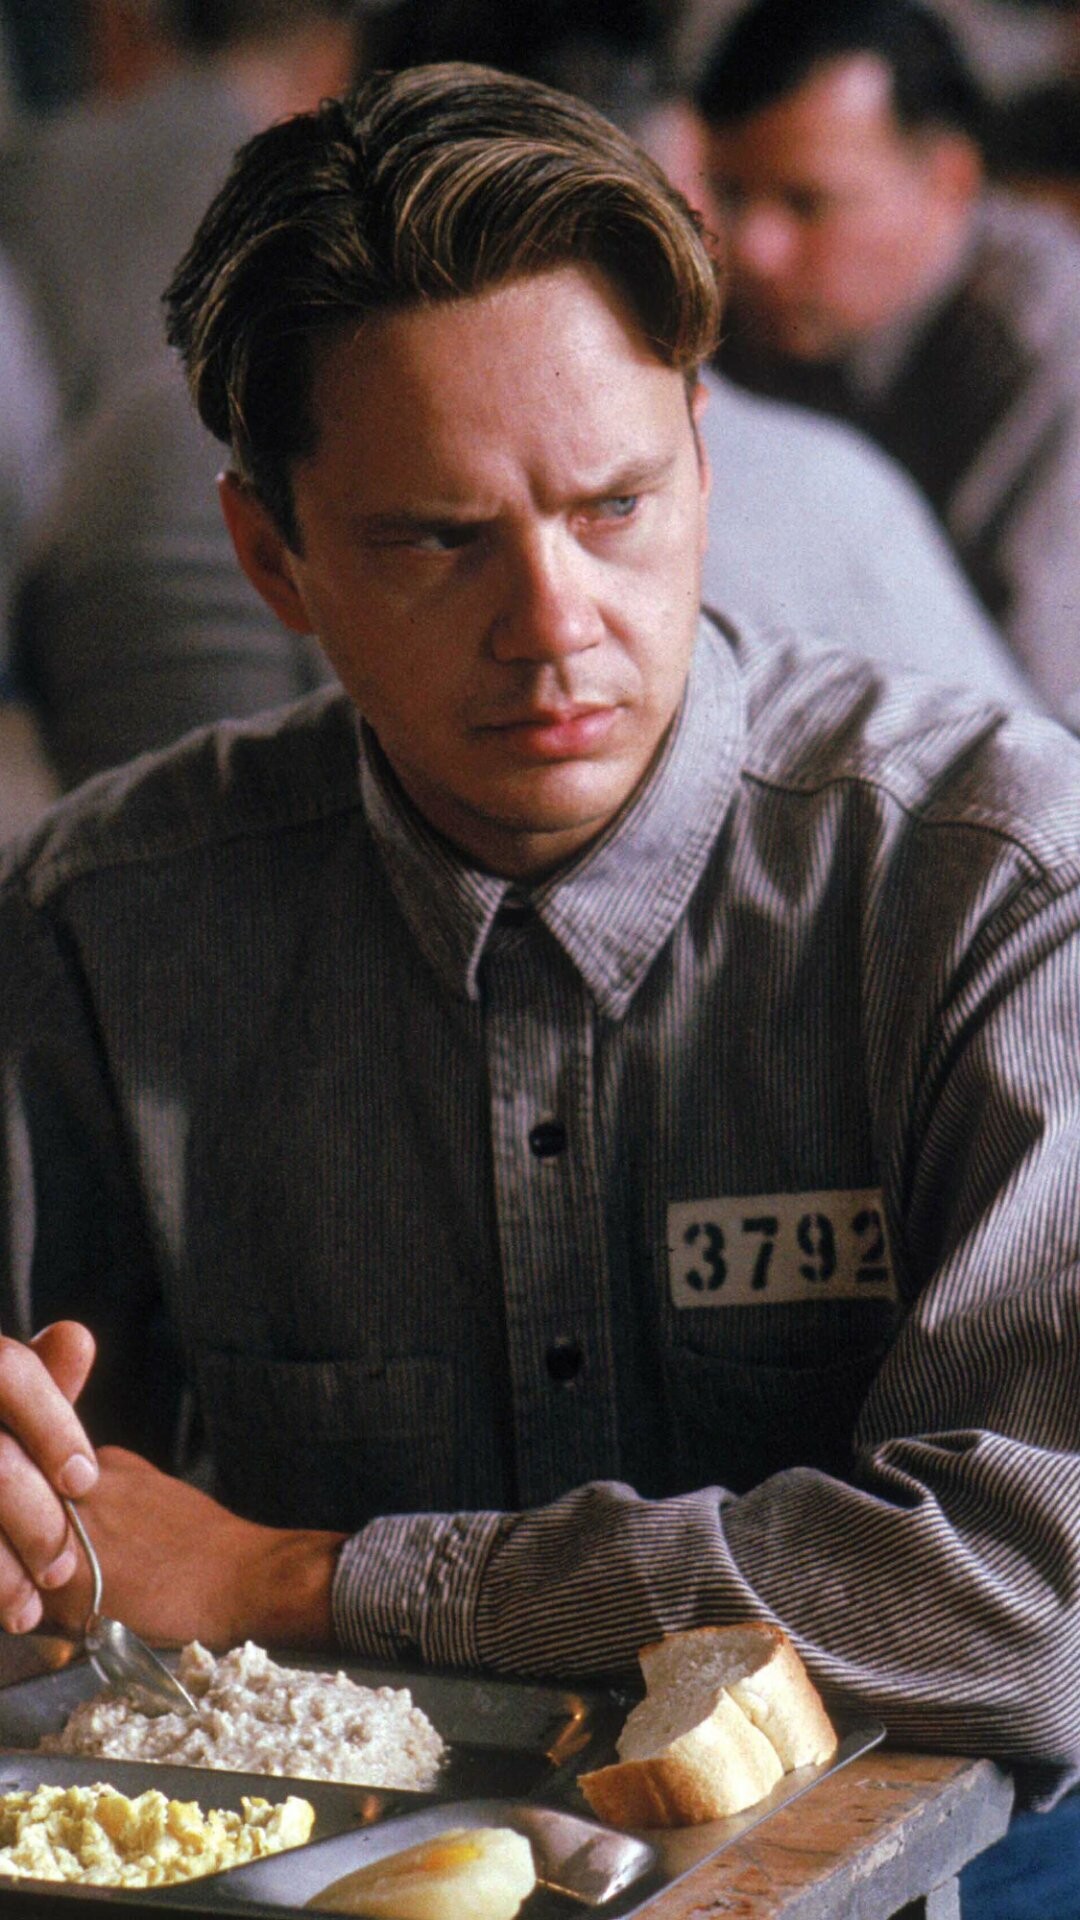 The Shawshank Redemption: Andrew "Andy" Dufresne, The main protagonist, Screenplay by Frank Darabont. 1080x1920 Full HD Wallpaper.